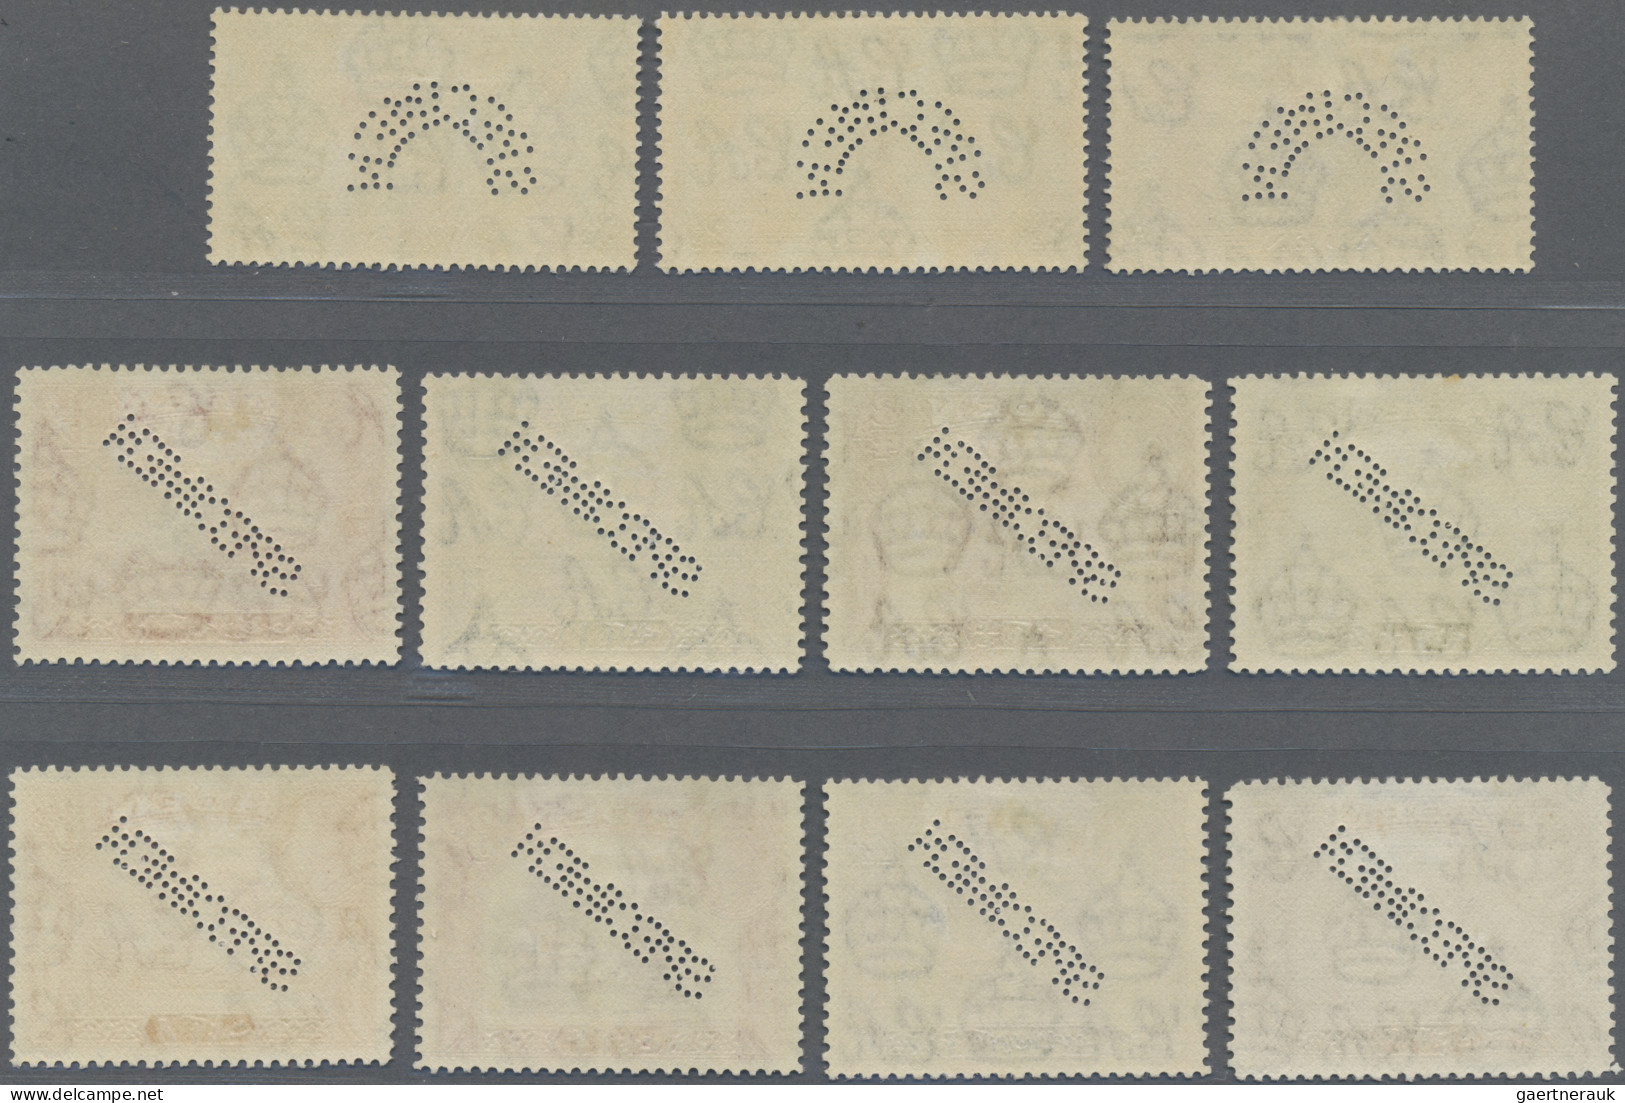 Aden: 1937/1946 Complete Sets Of First Four Issues (30 Stamps) All Punctured "SP - Yemen